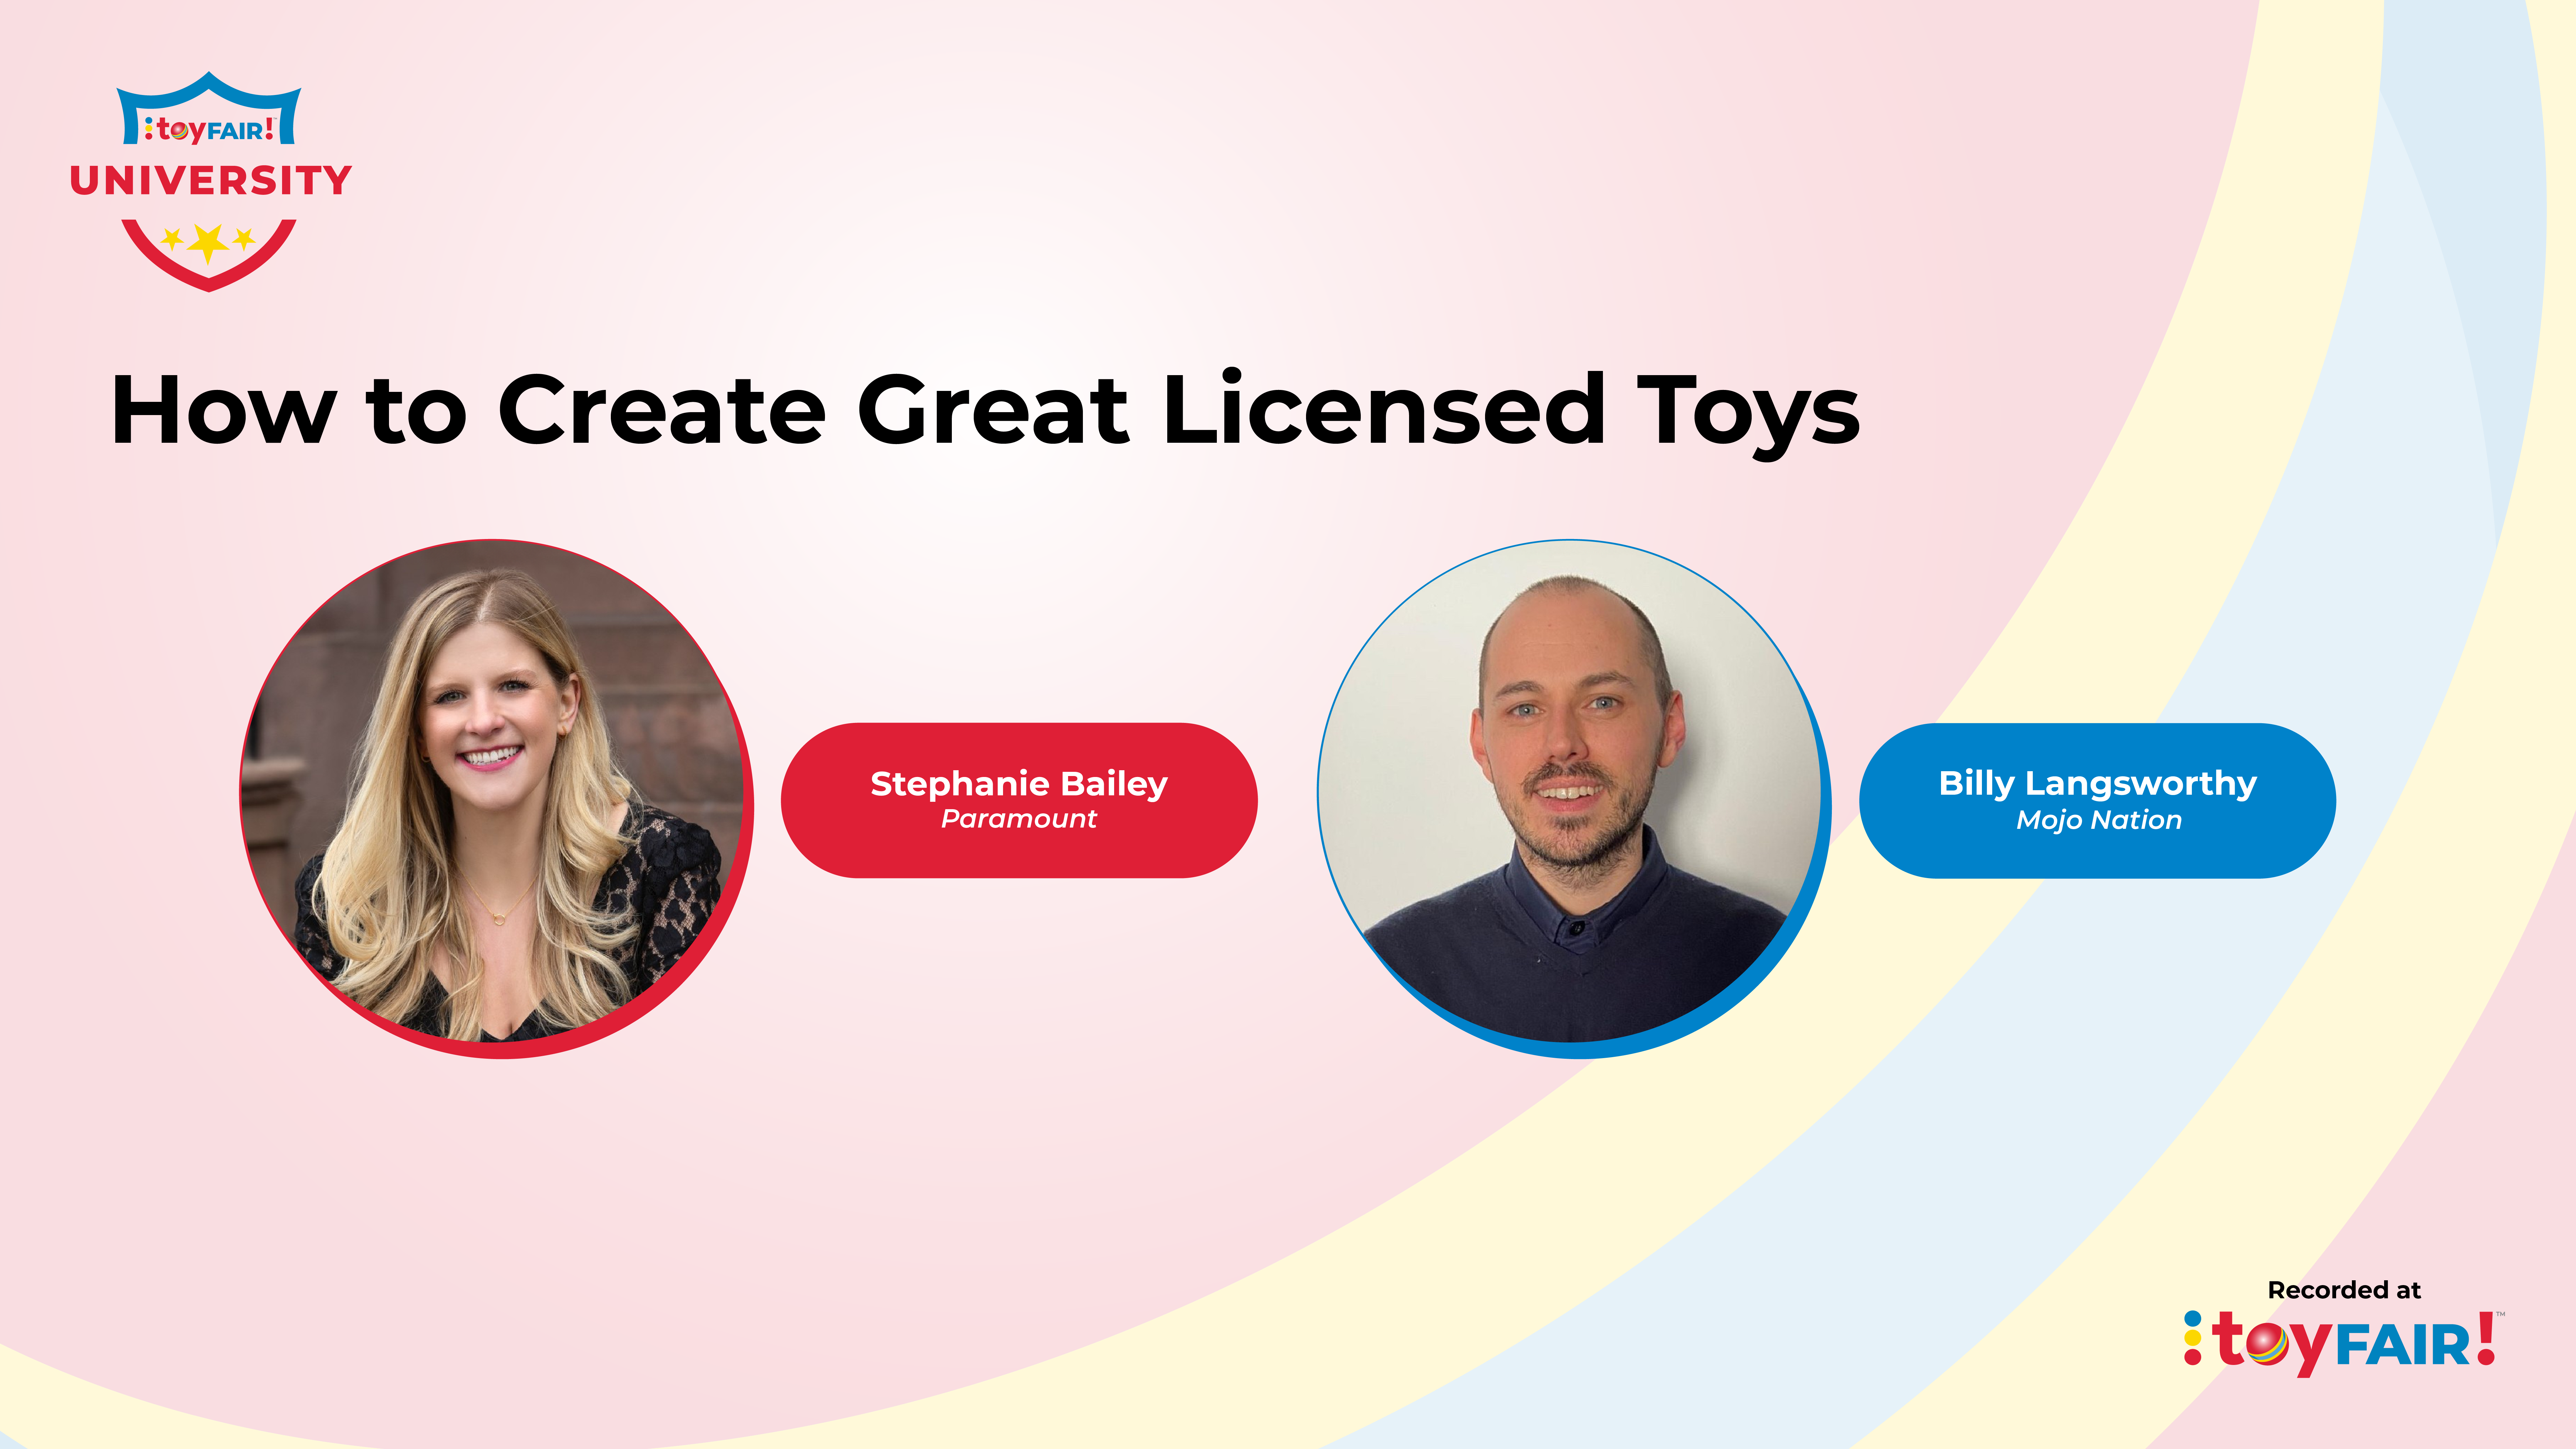 How to Create Great Licensed Toys